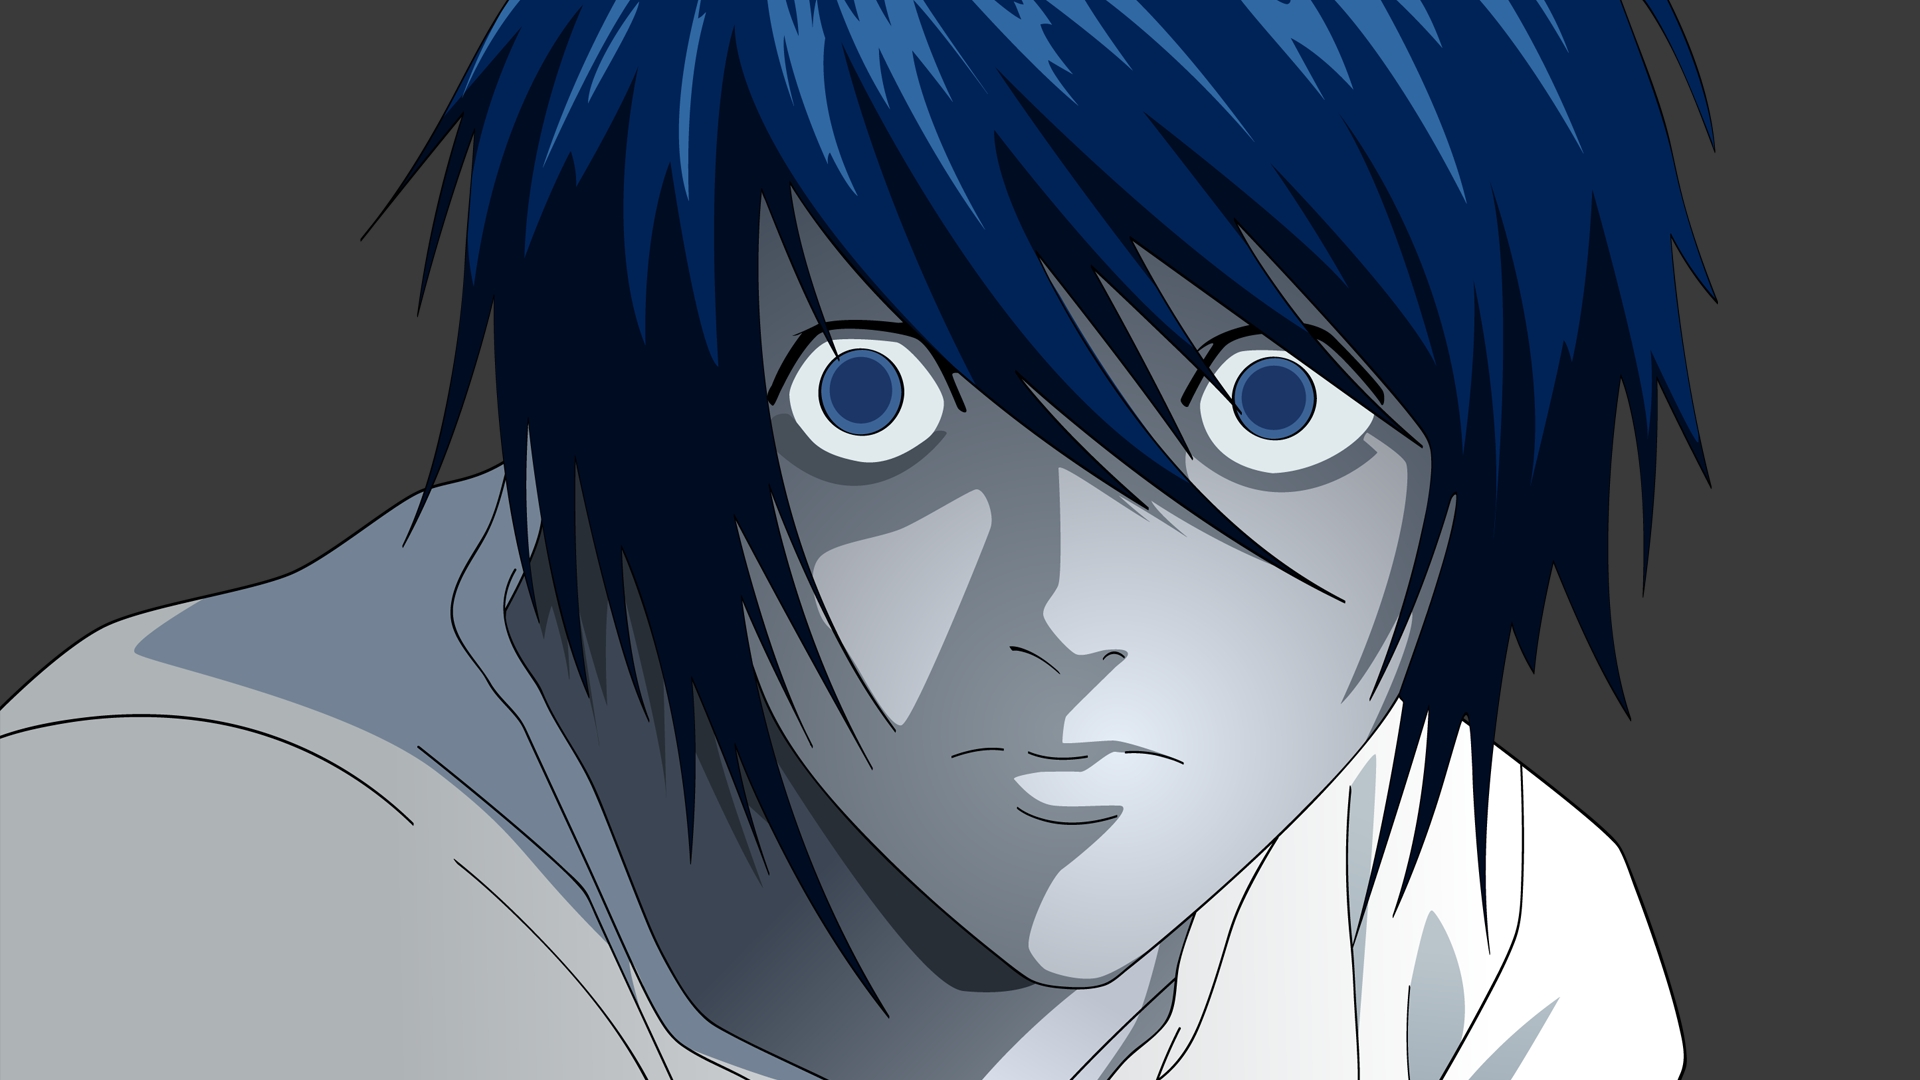 L from death note